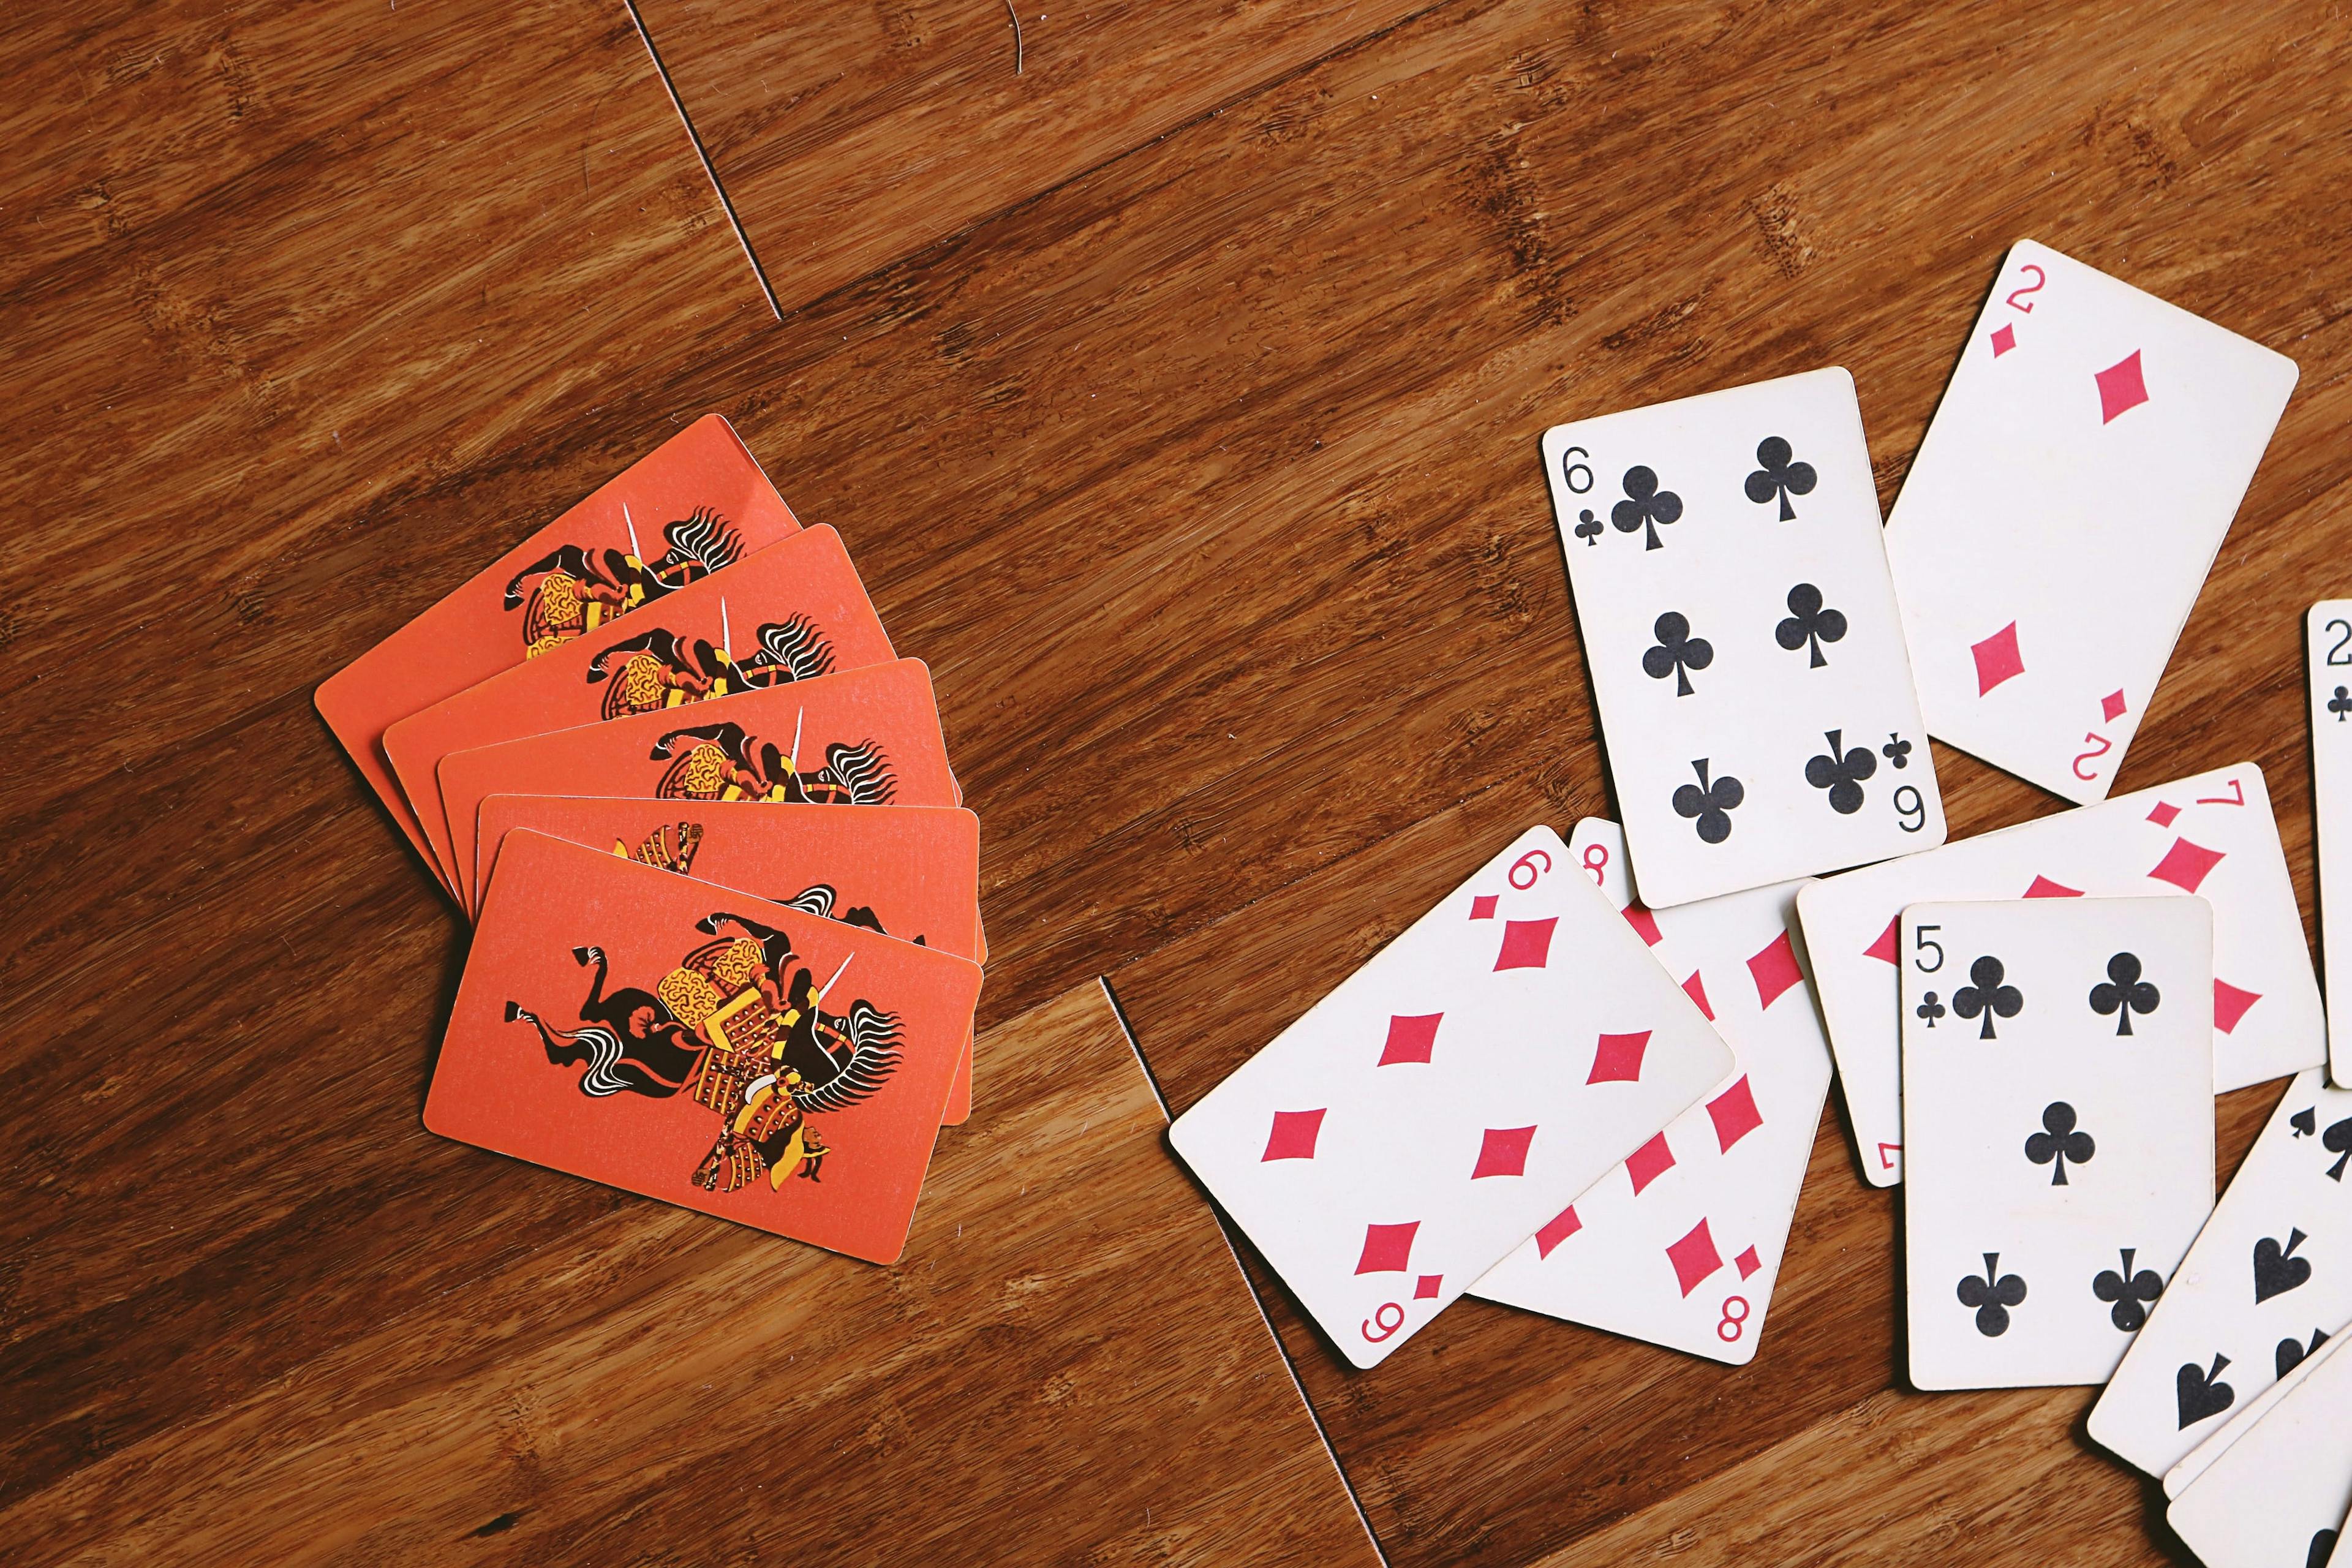 playing cards on a wooden surface